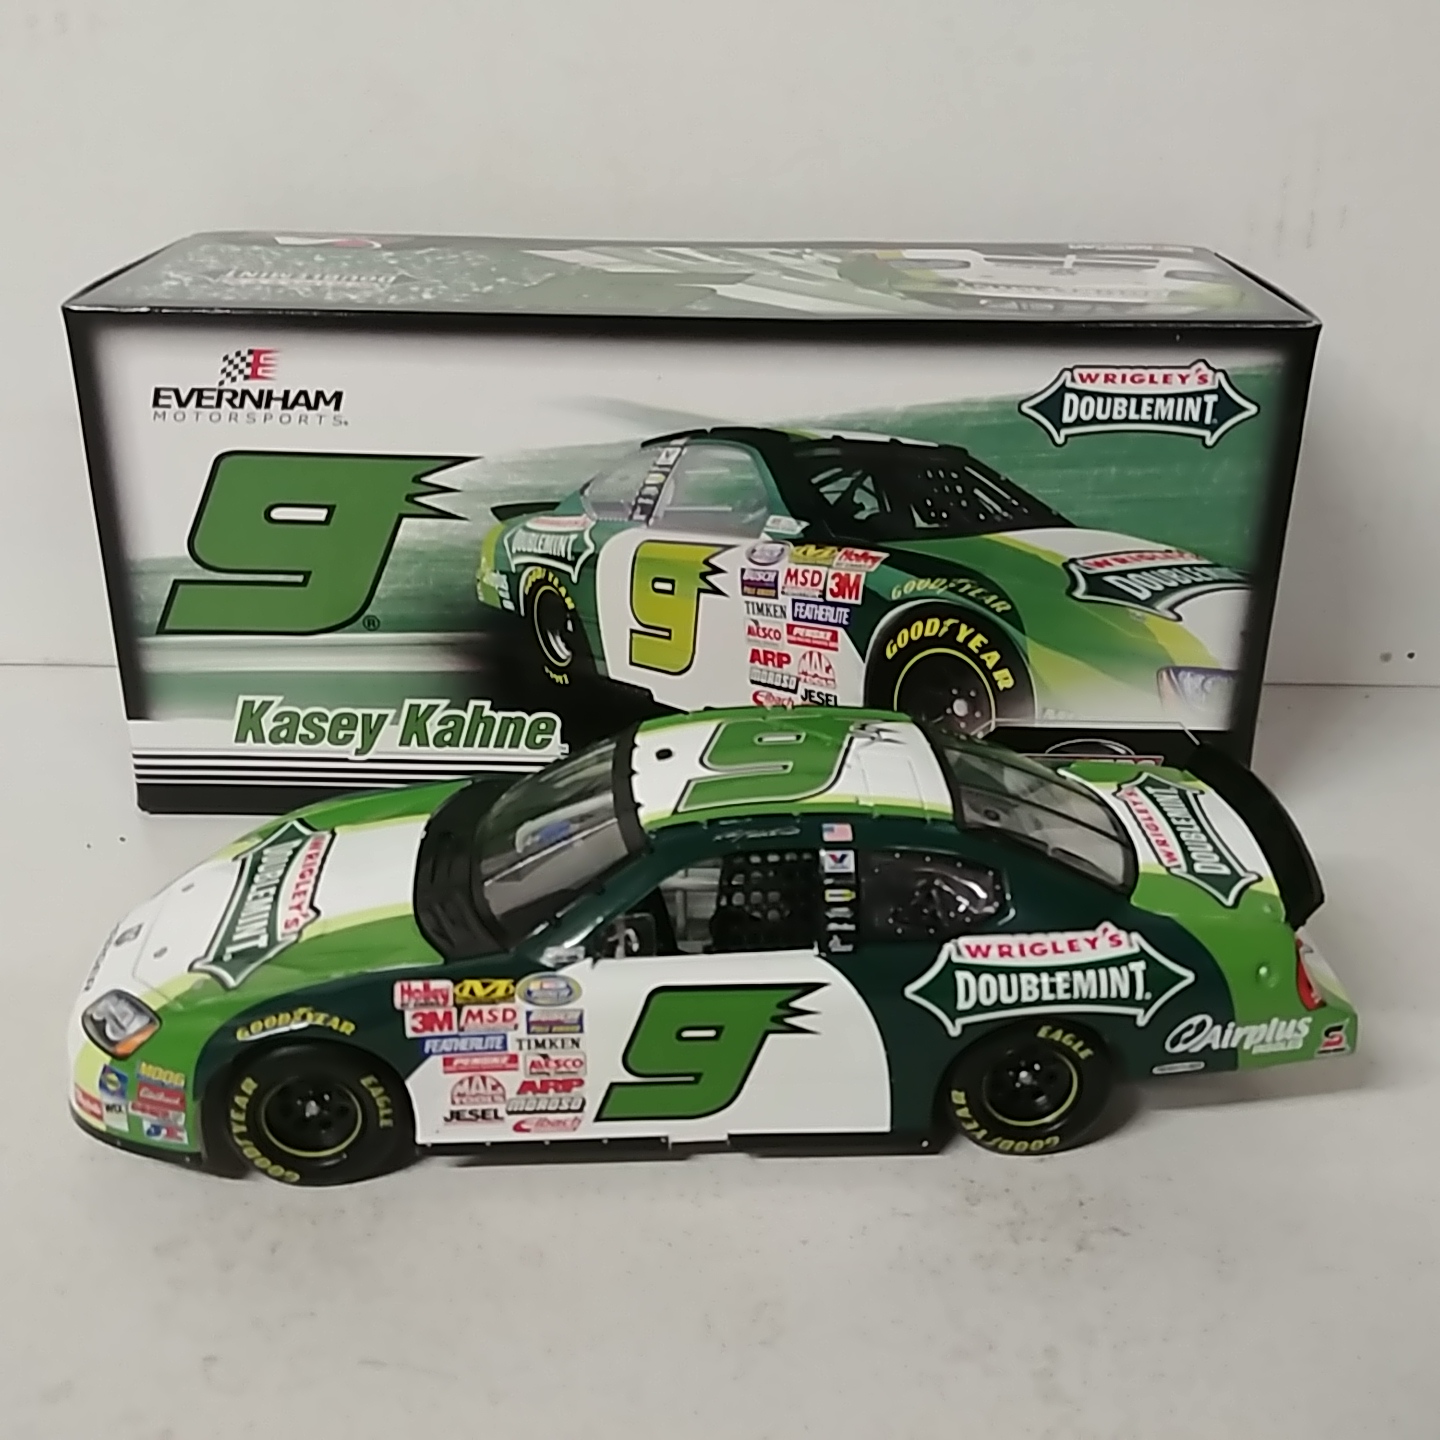 2007 Kasey Kahne 1/24th Wrigley's DoubleMint "Busch Series" Dodge Charger